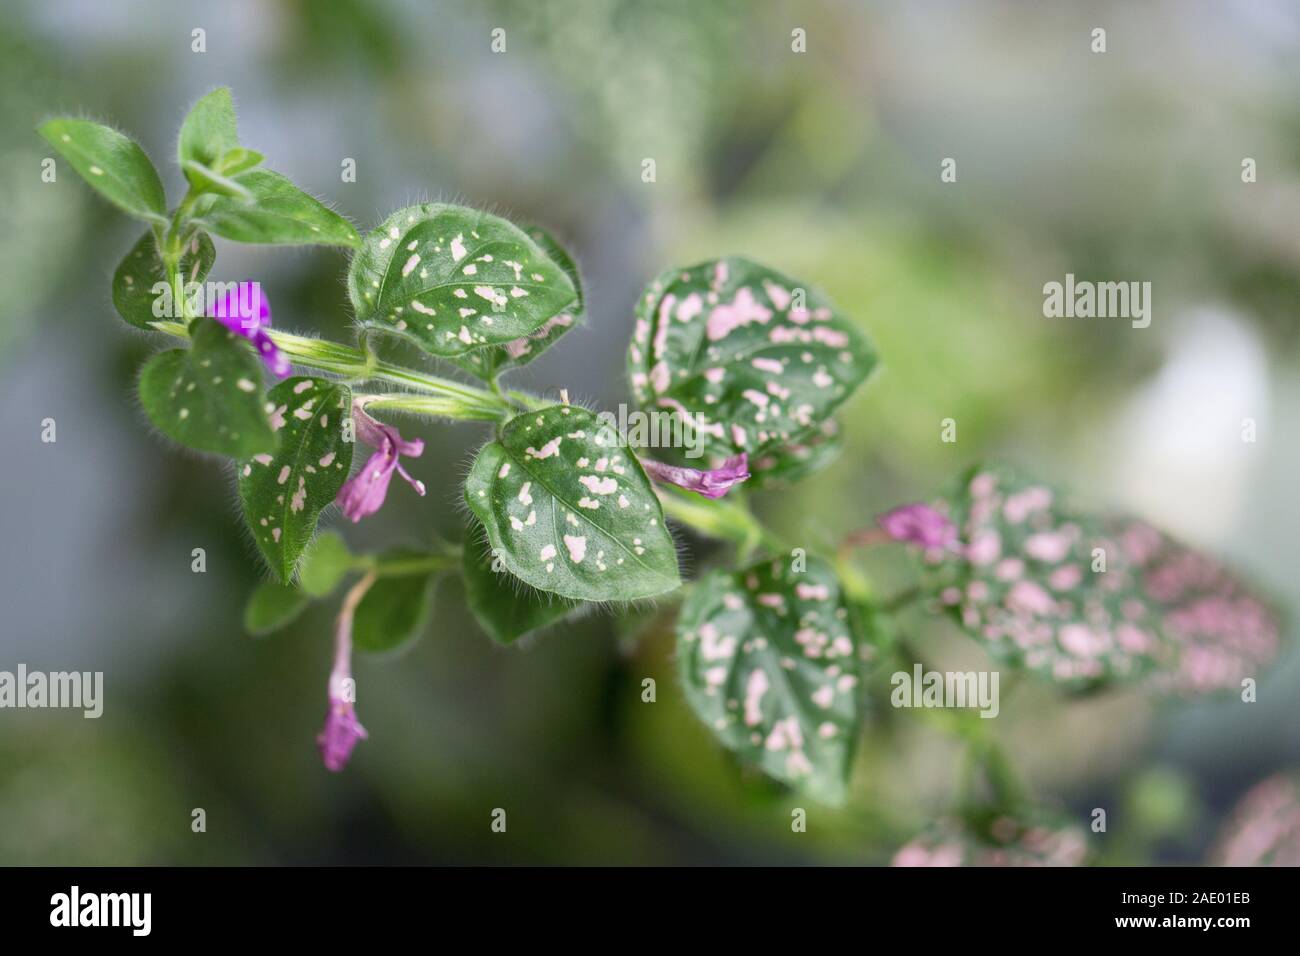 Close Up Of The Leaves And Flowers Of A Hypoestes Phyllostachya Pink Polka Dot Plant Stock Photo Alamy,How To Inject A Turkey